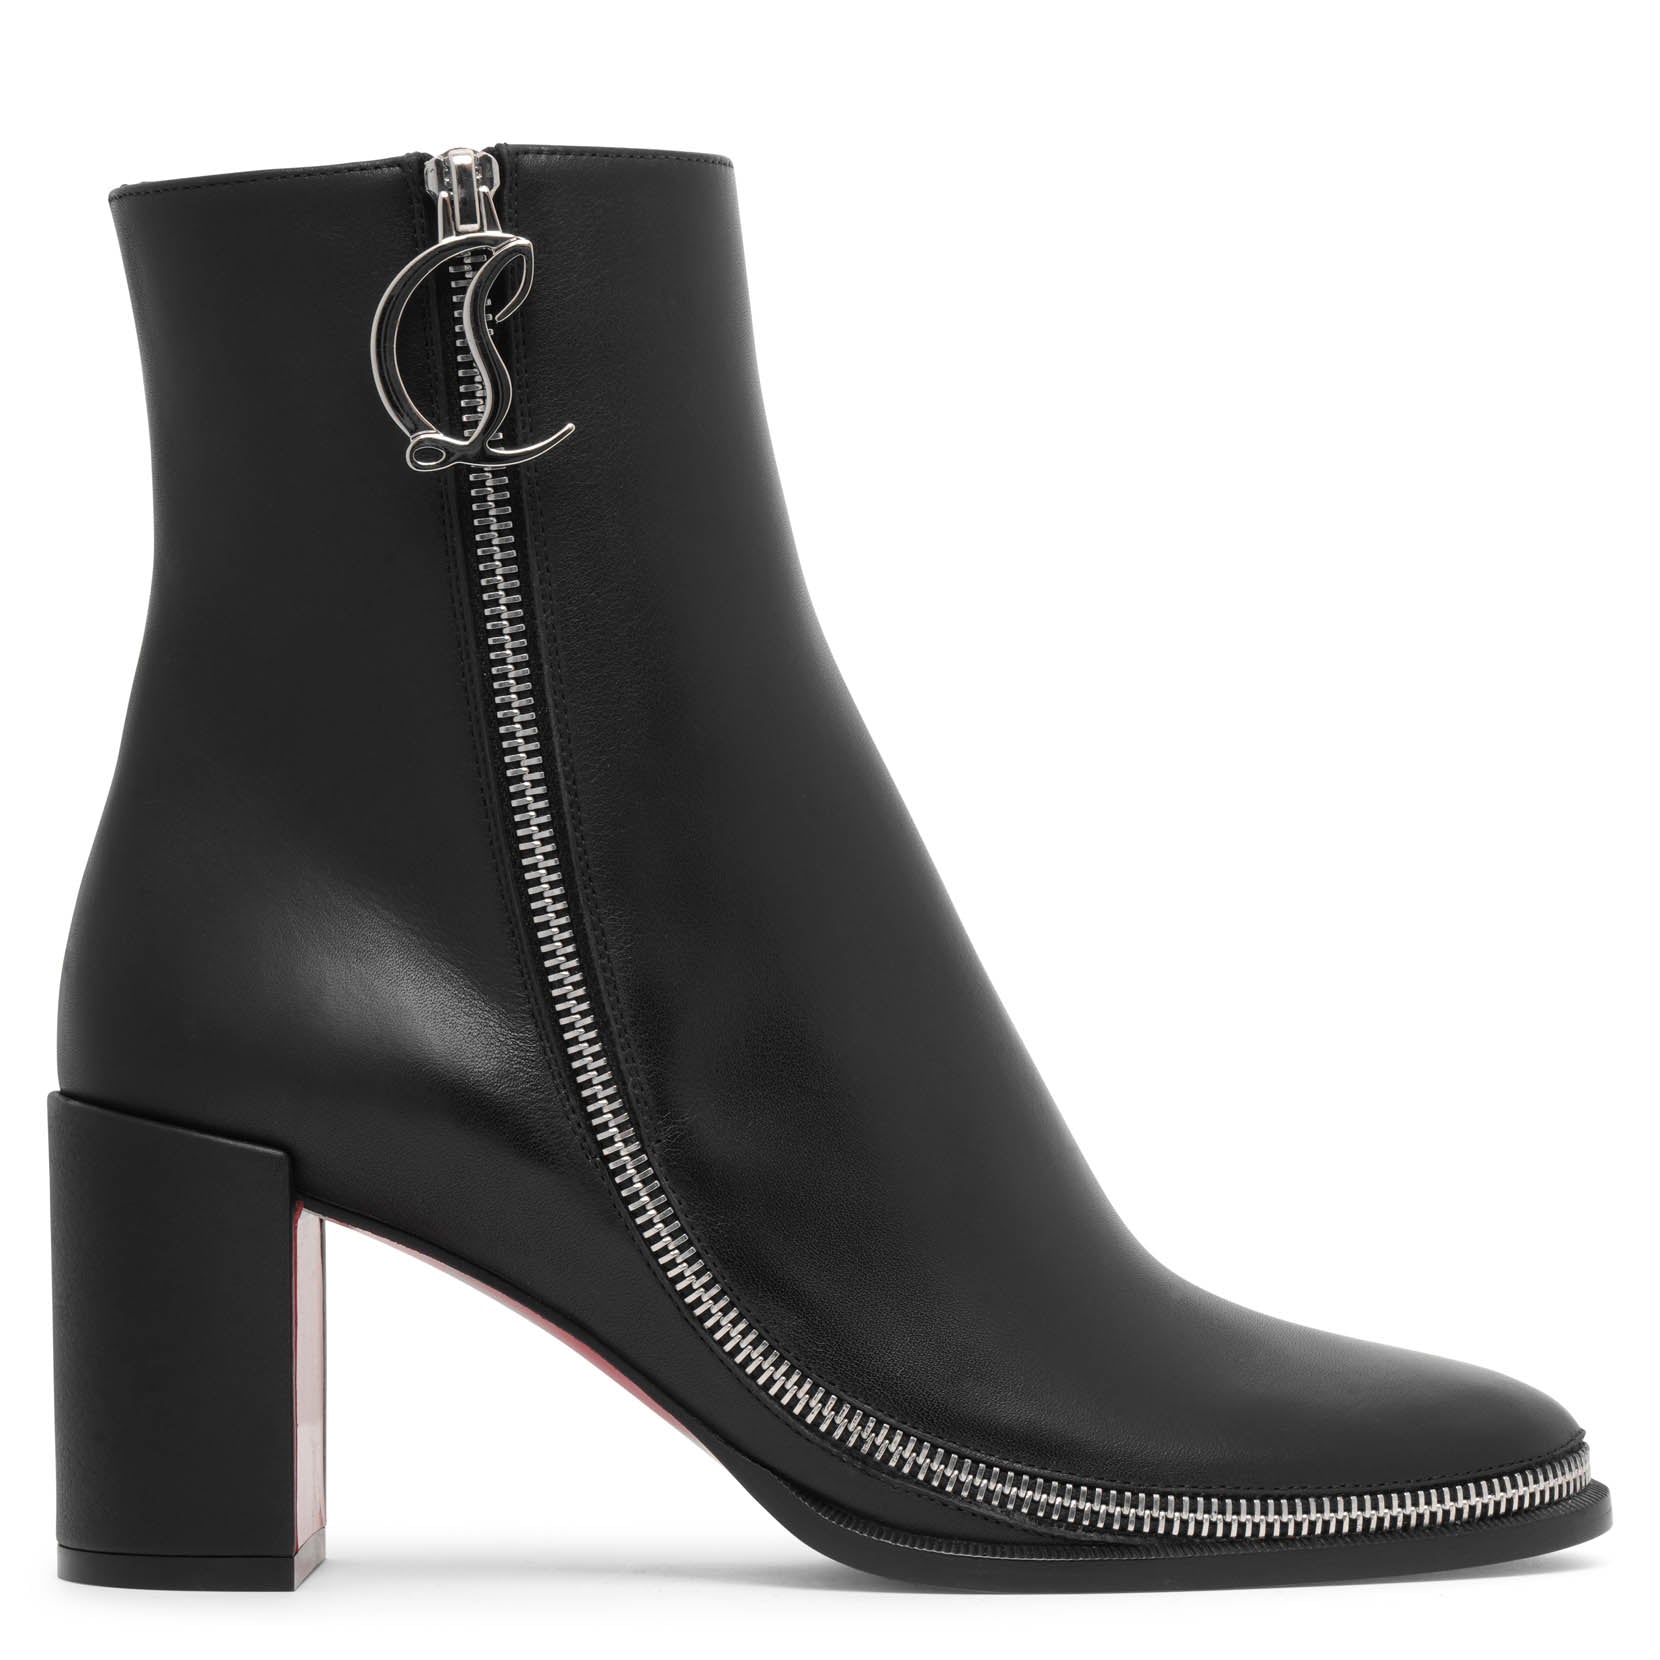 Christian Louboutin Cl Zip 70 Black Leather Boots